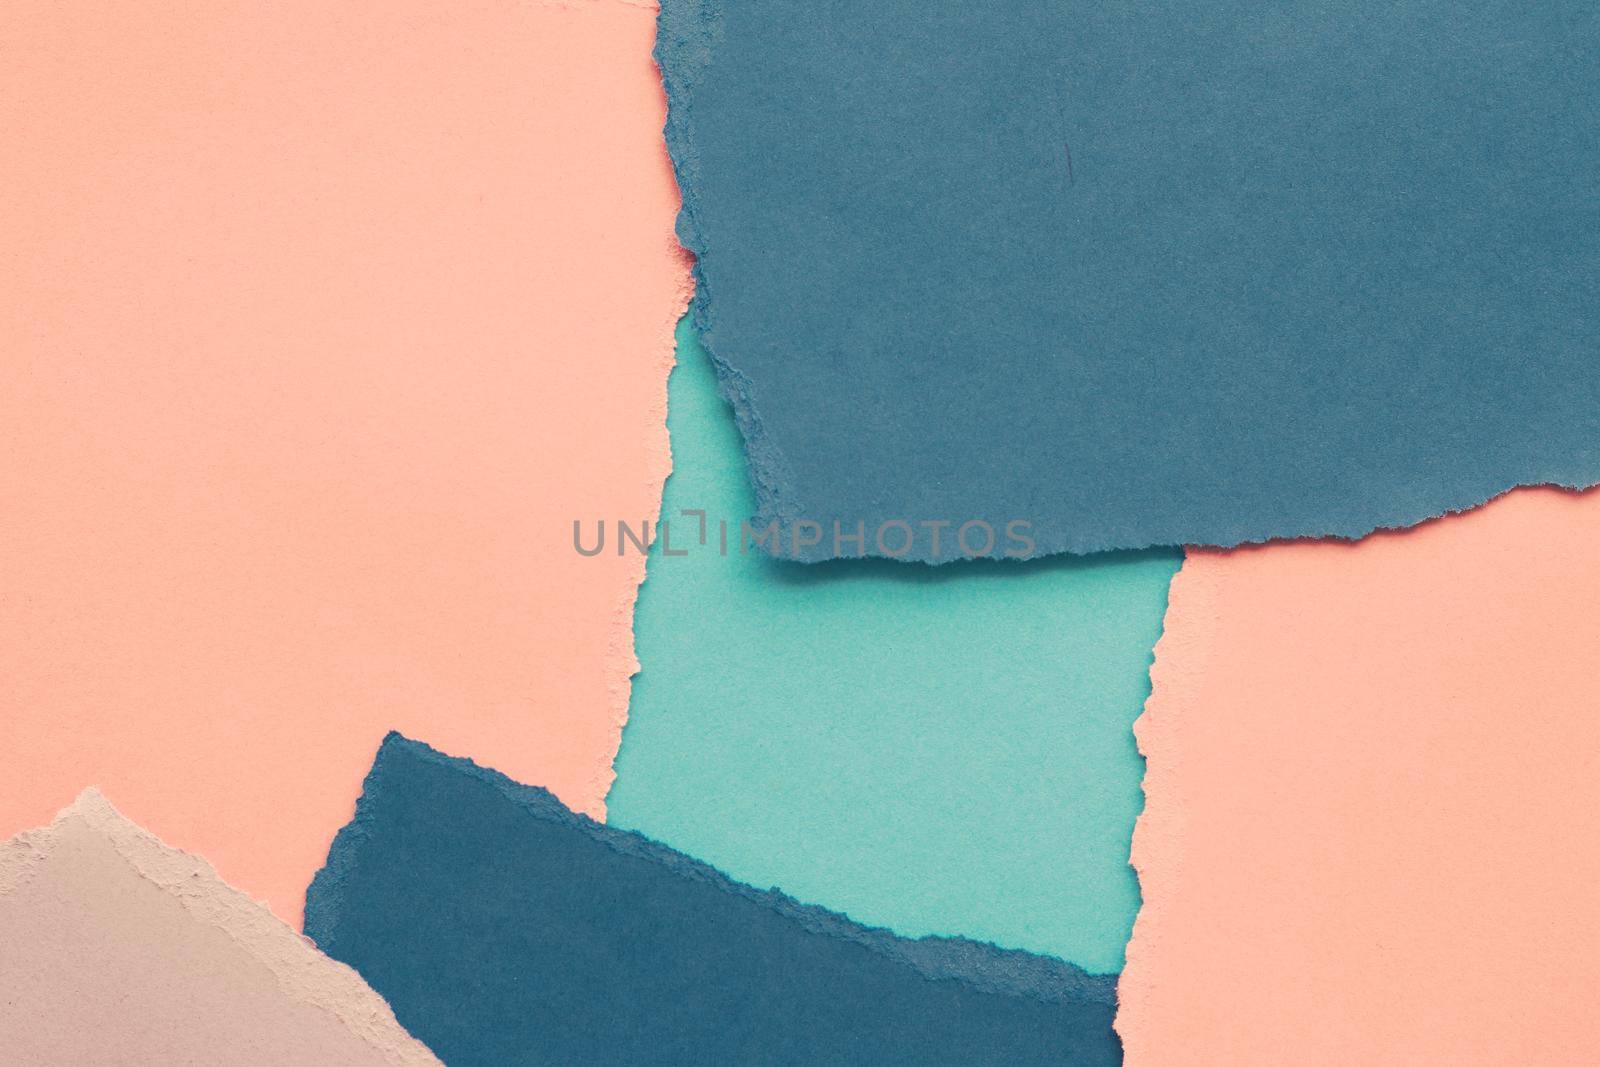 Torn paper textured background, stationery mockup by Anneleven